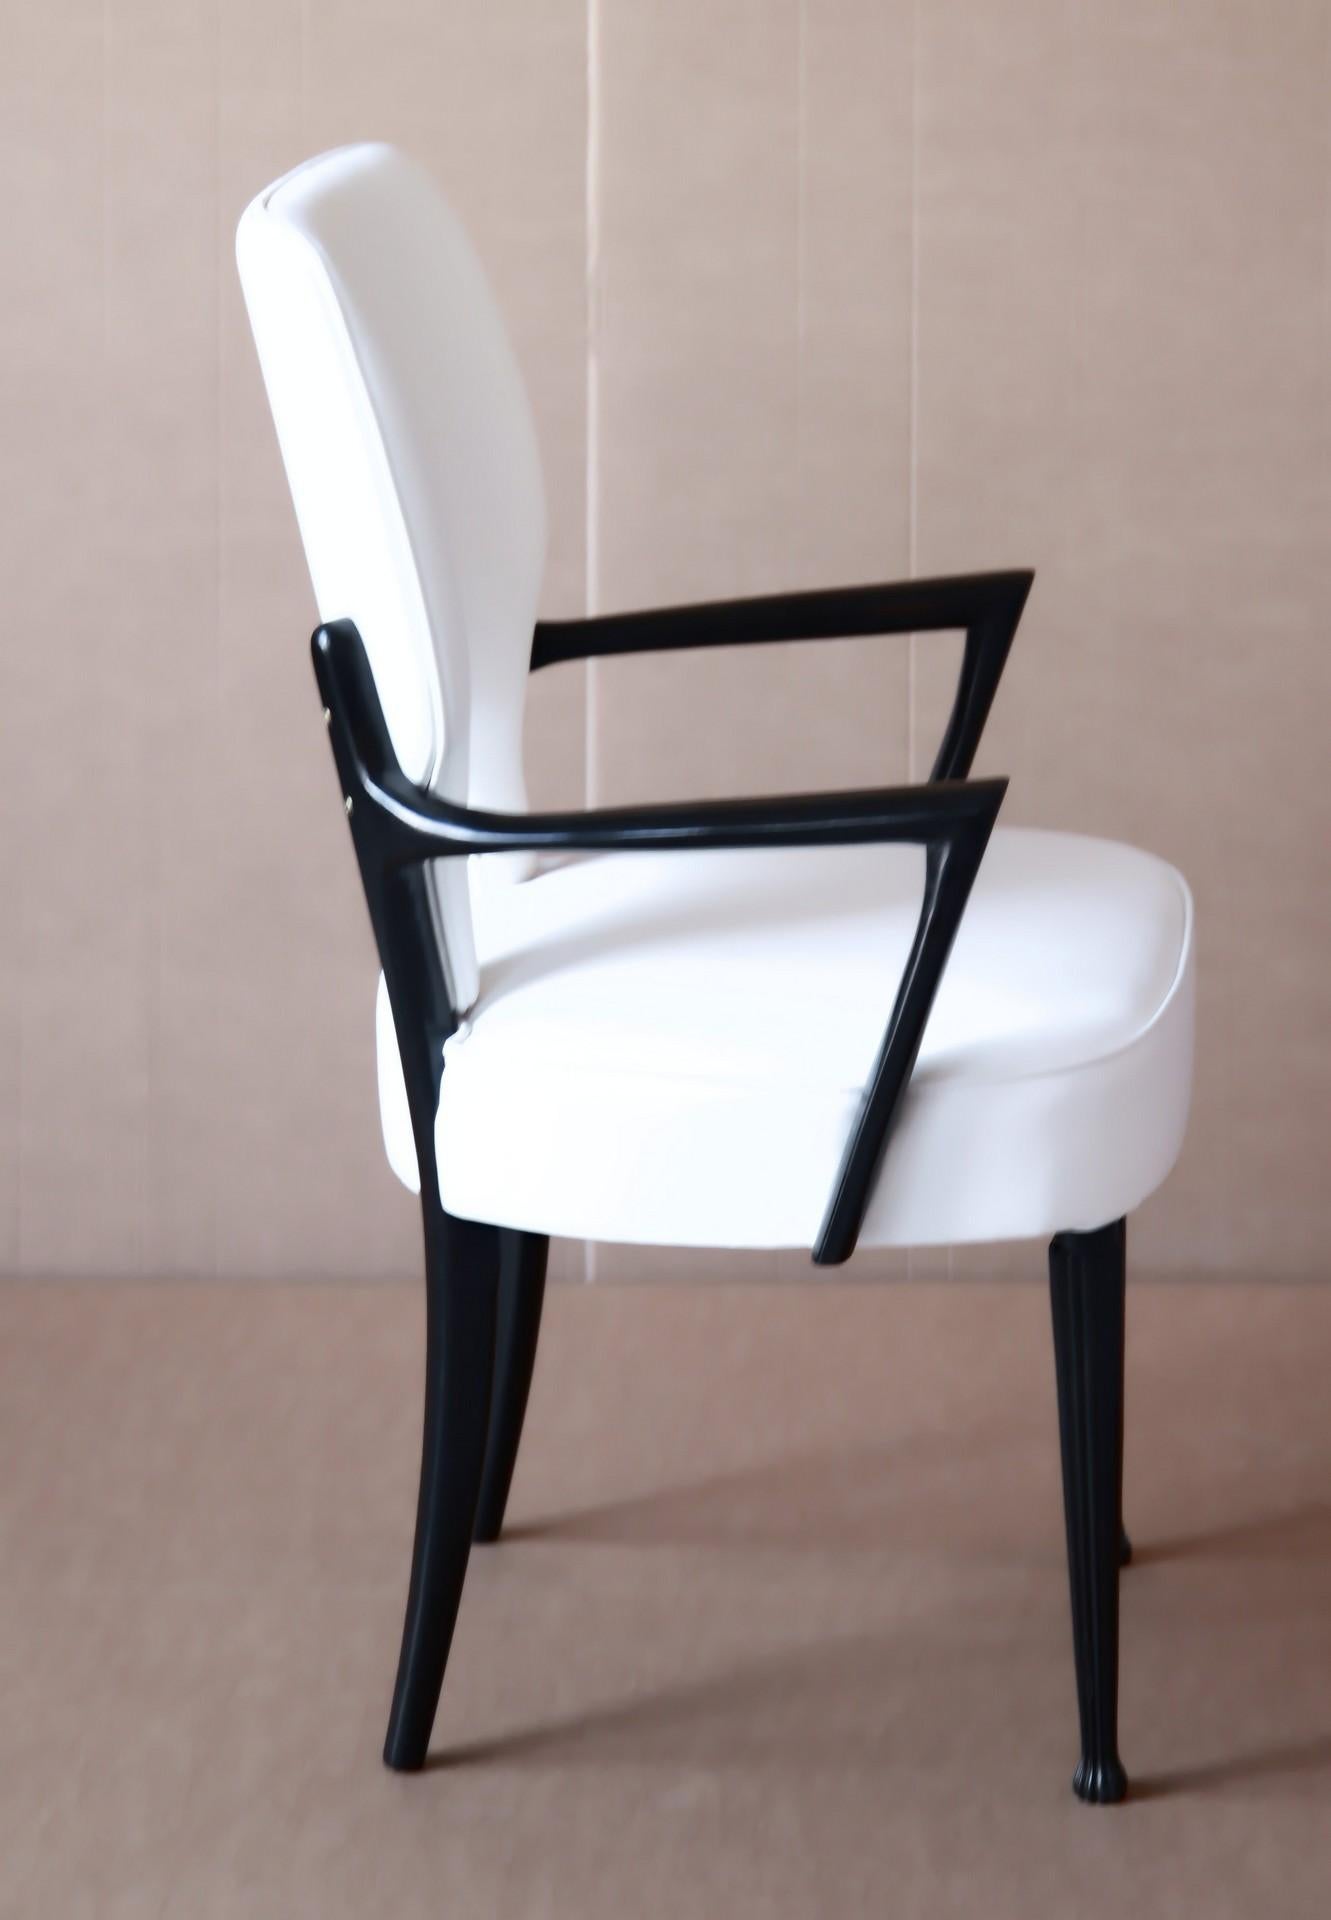 Beech Ebonized Modernist Armchair, Fiore leather upholstered. Great Design. Comfort 